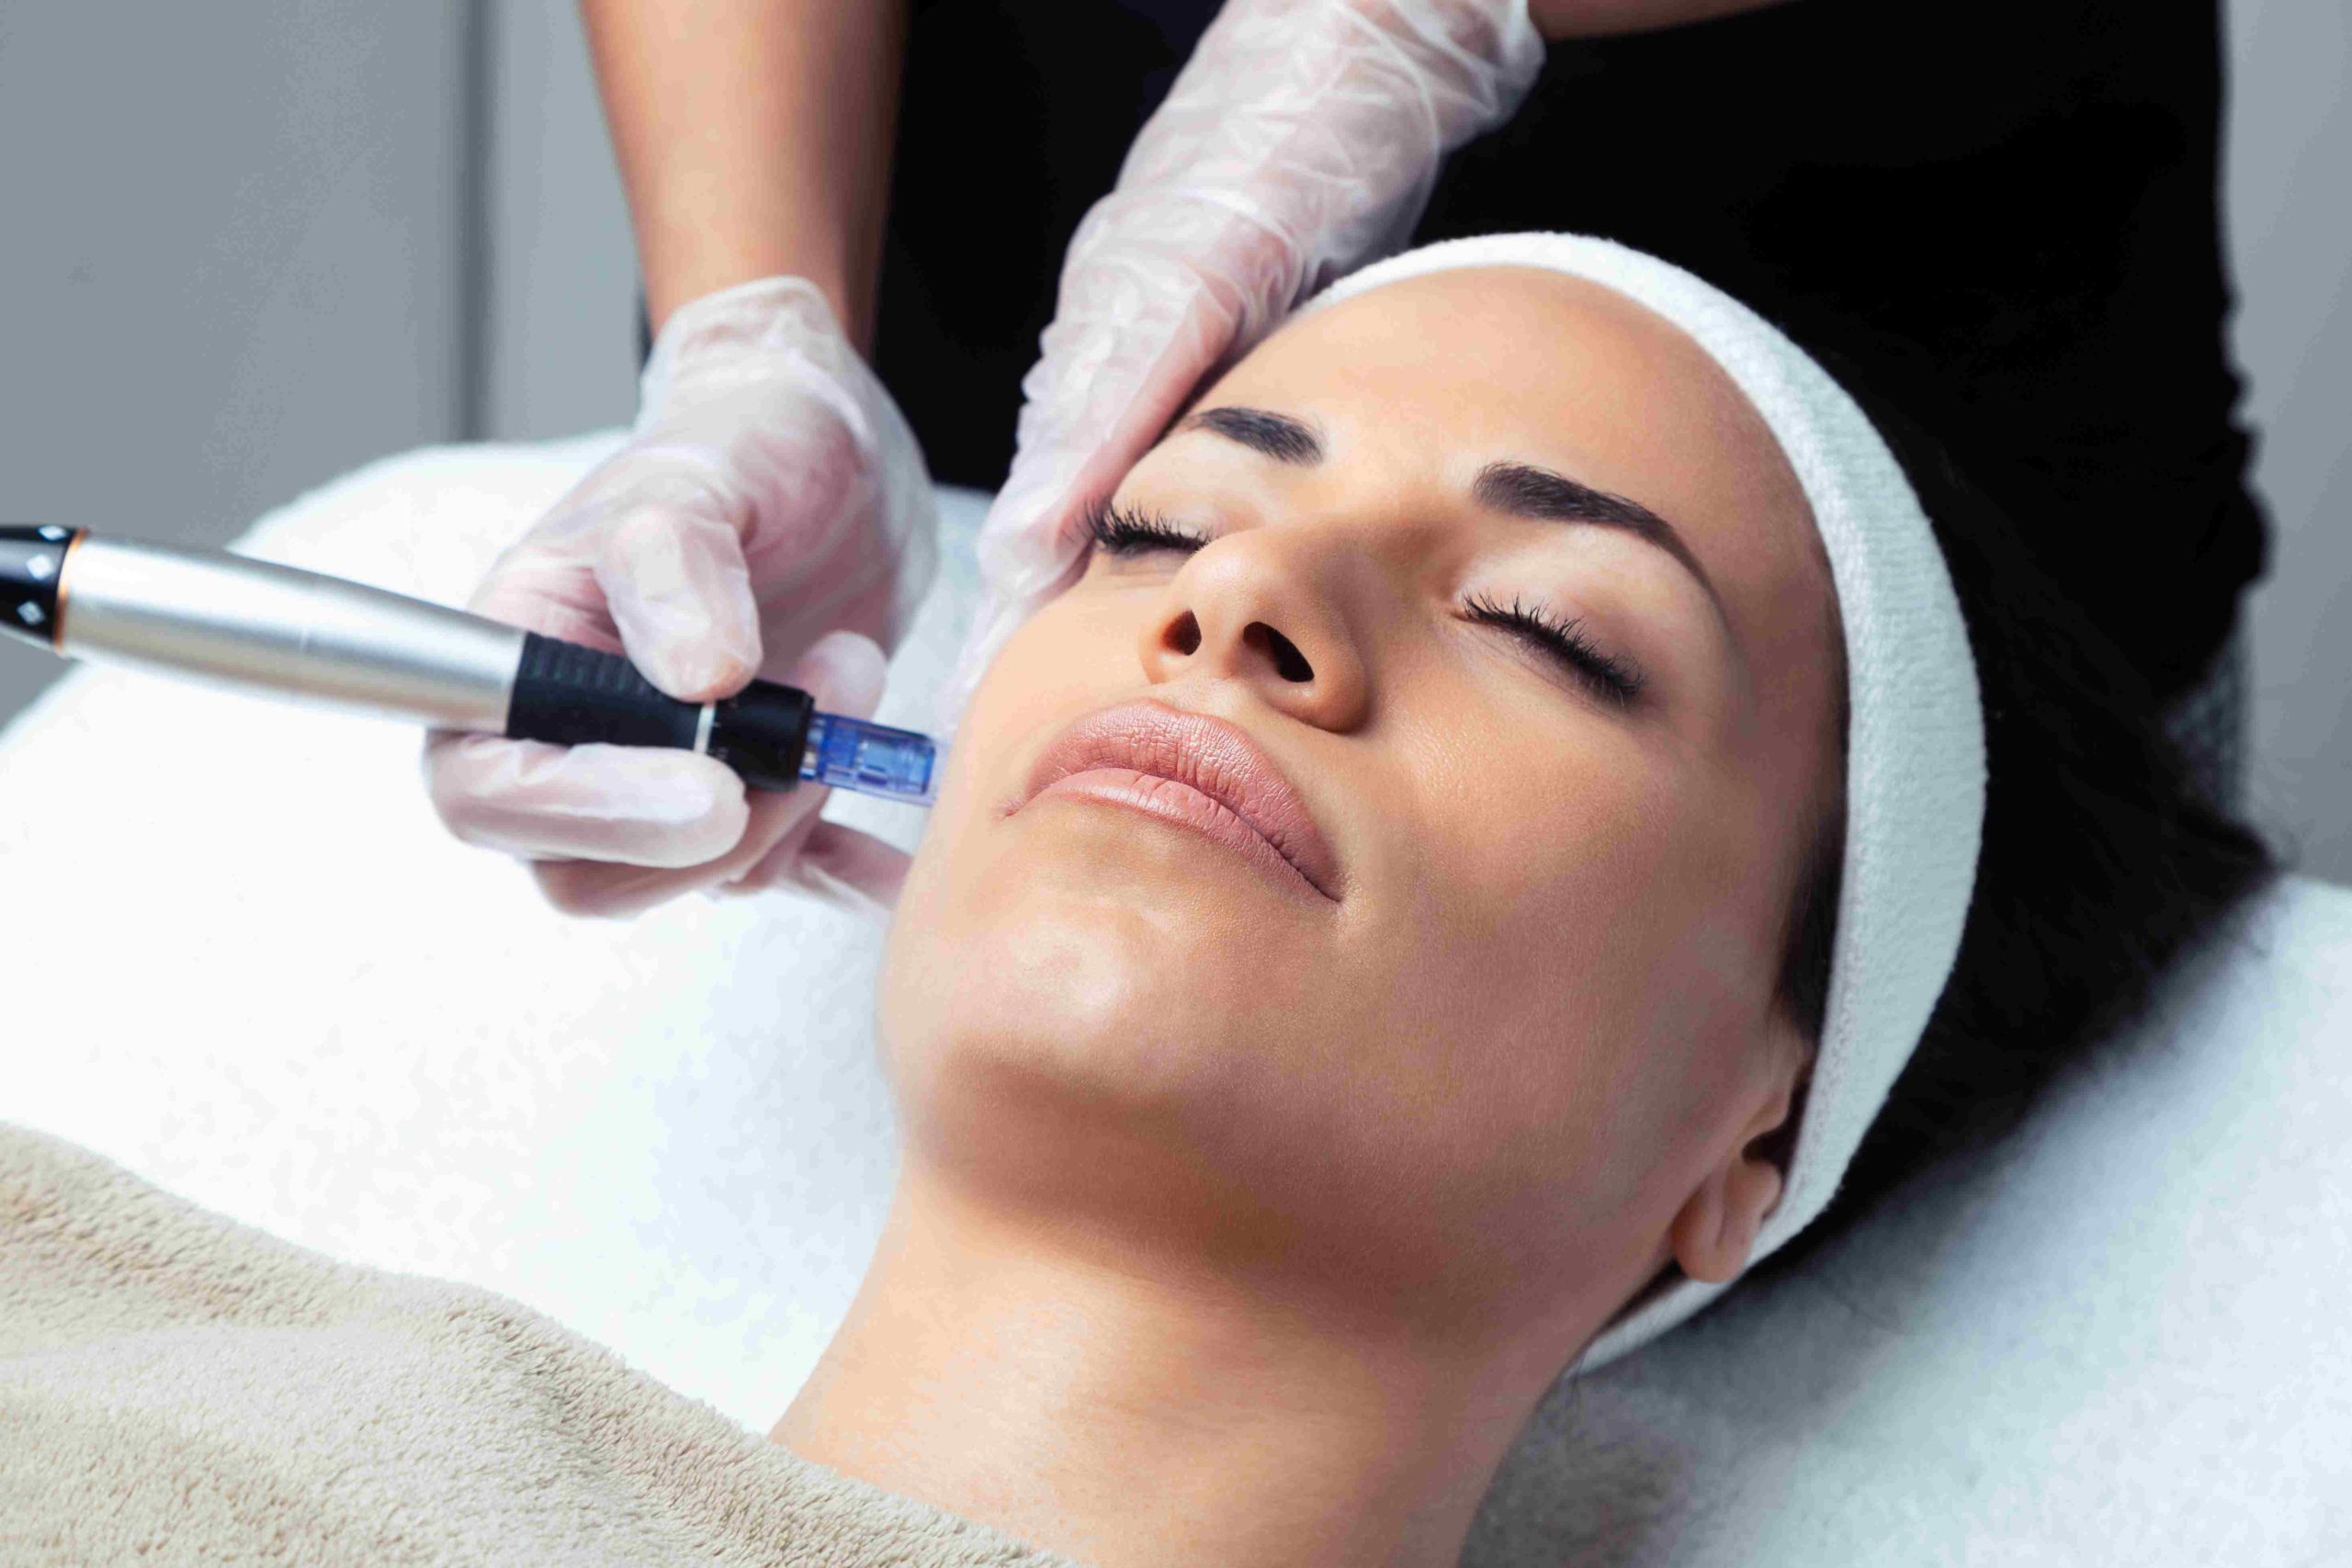 A Women getting microneedling | virtual rf microneedling | Avail Aesthetics in Cary, Raleigh & Wake Forest, NC